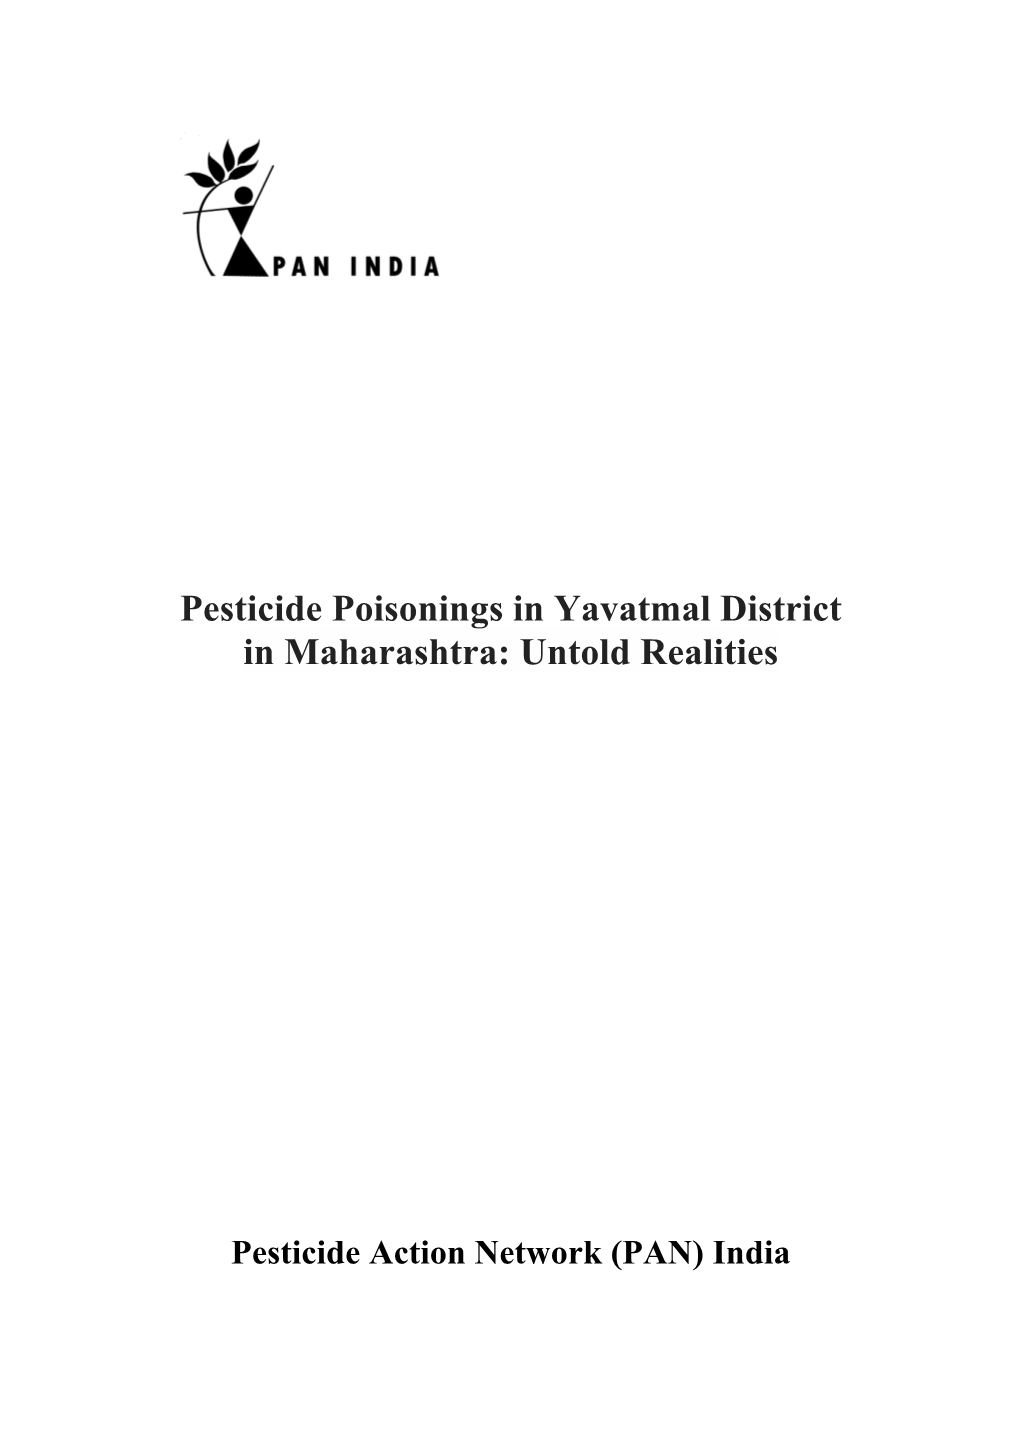 Pesticide Poisonings in Yavatmal District in Maharashtra: Untold Realities